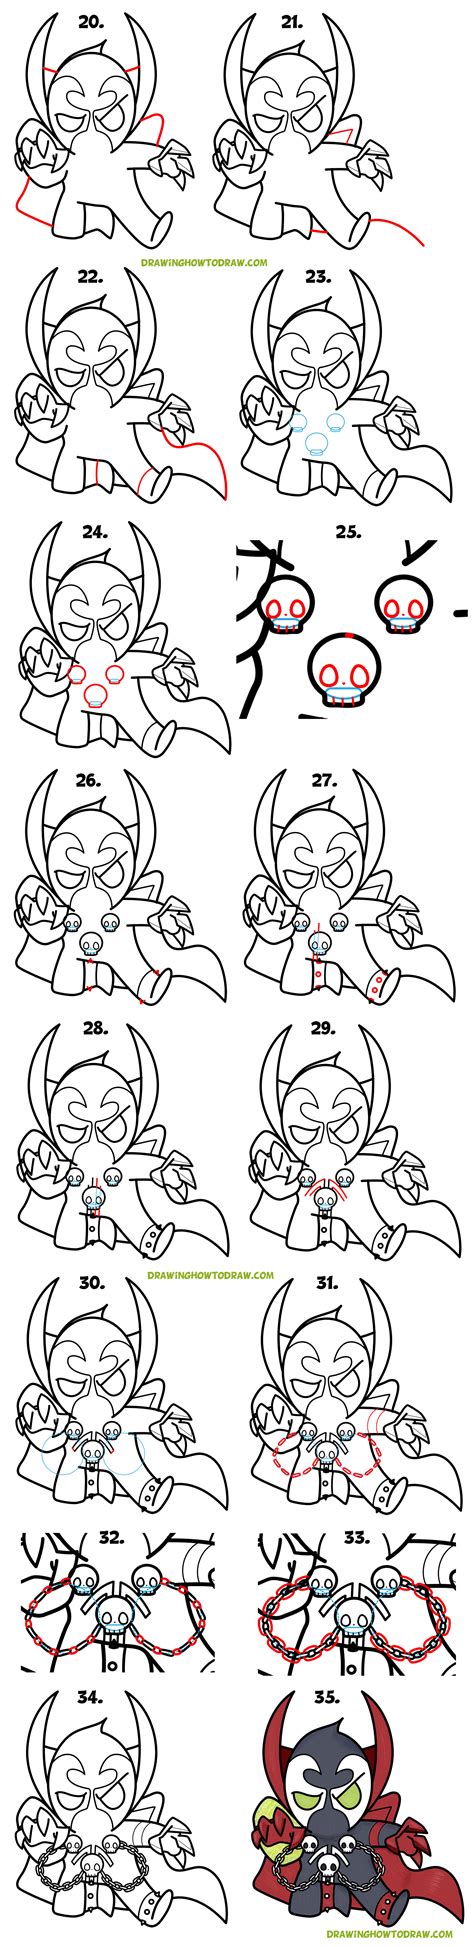 How To Draw A Chibi Spawn With Easy Step By Step Drawing Tutorial For